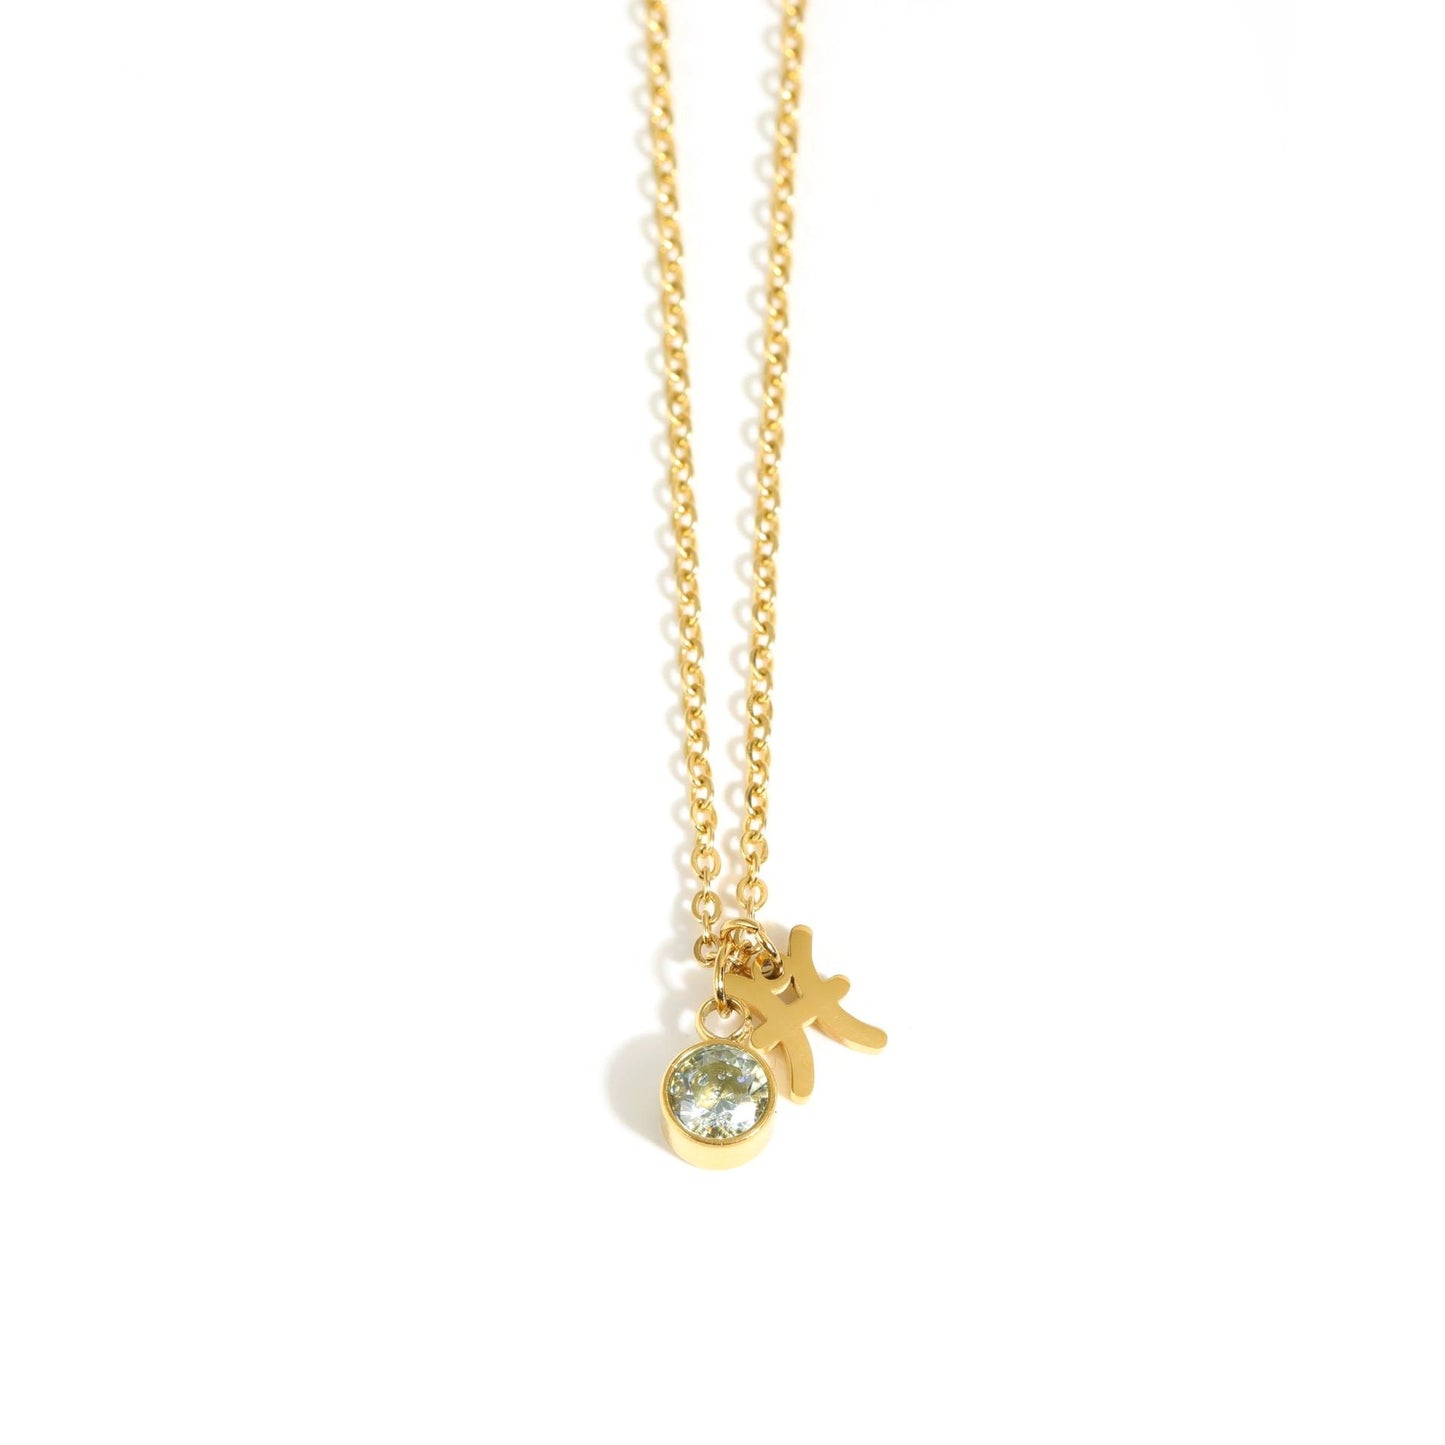 Pisces Zodiac Sign Birthstone Gold Necklace.